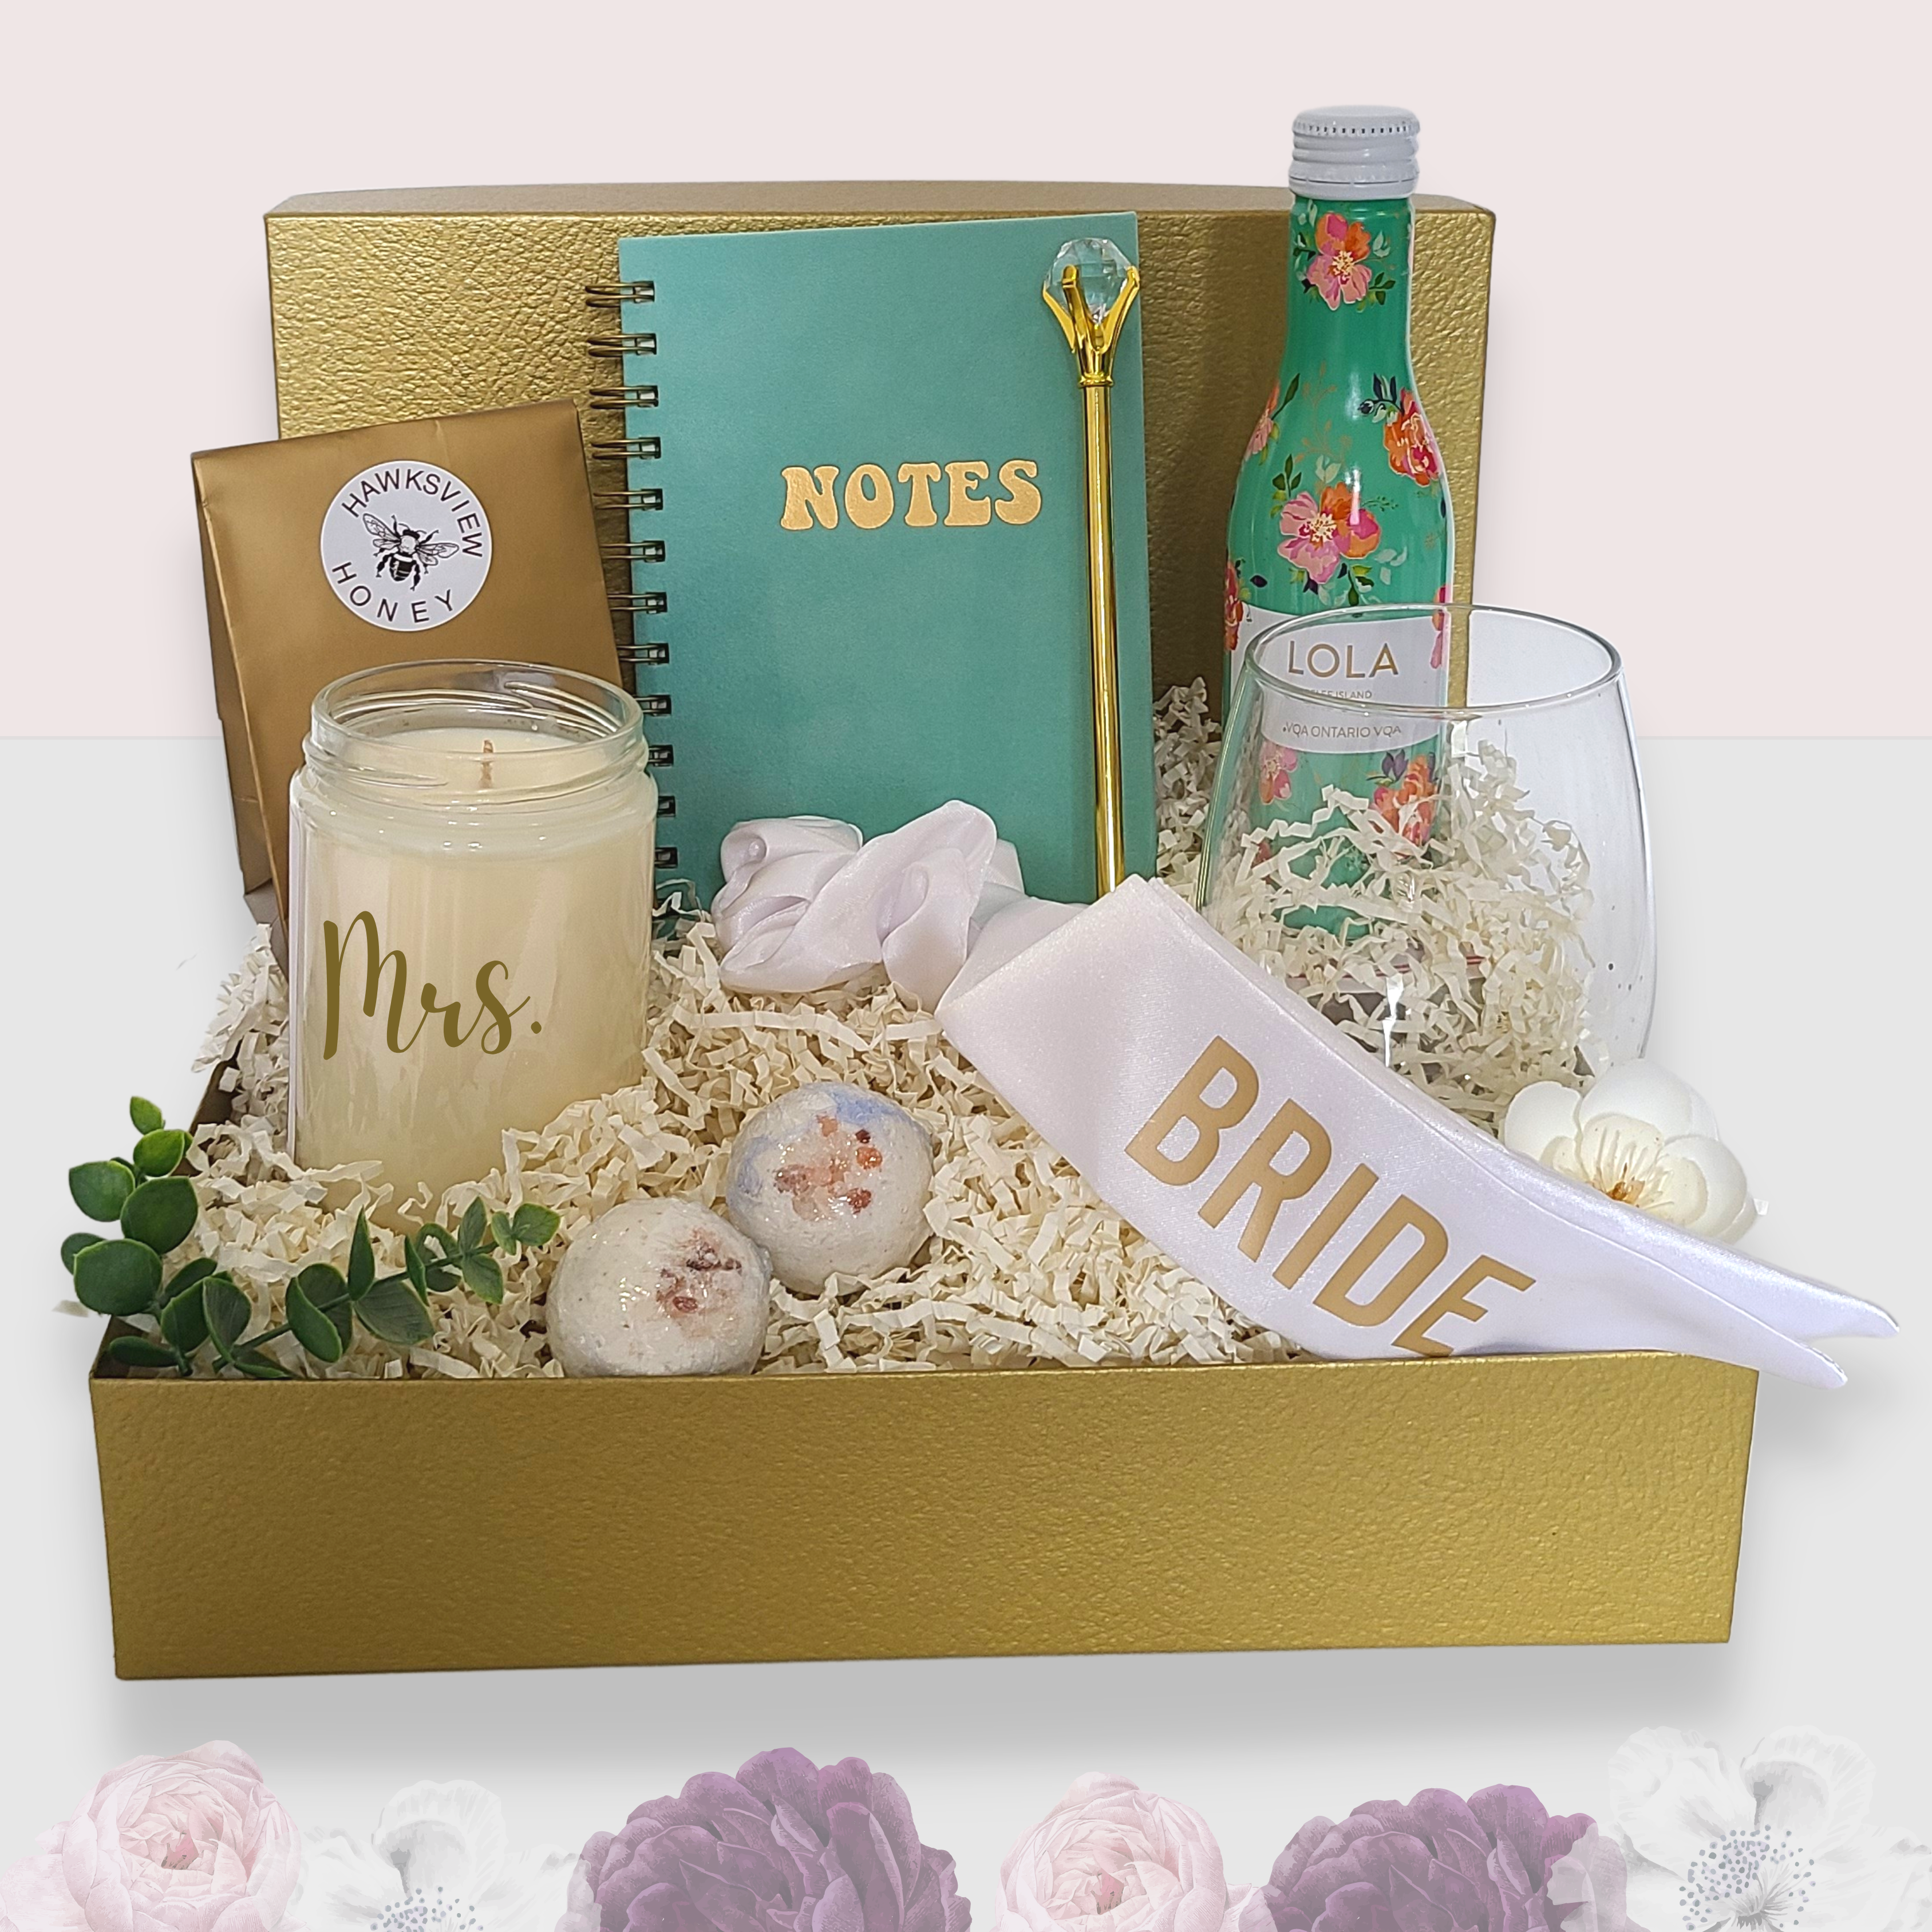 Unforgettable Gifts from Maid of Honor to Bride | Bridal Shower 101-hangkhonggiare.com.vn